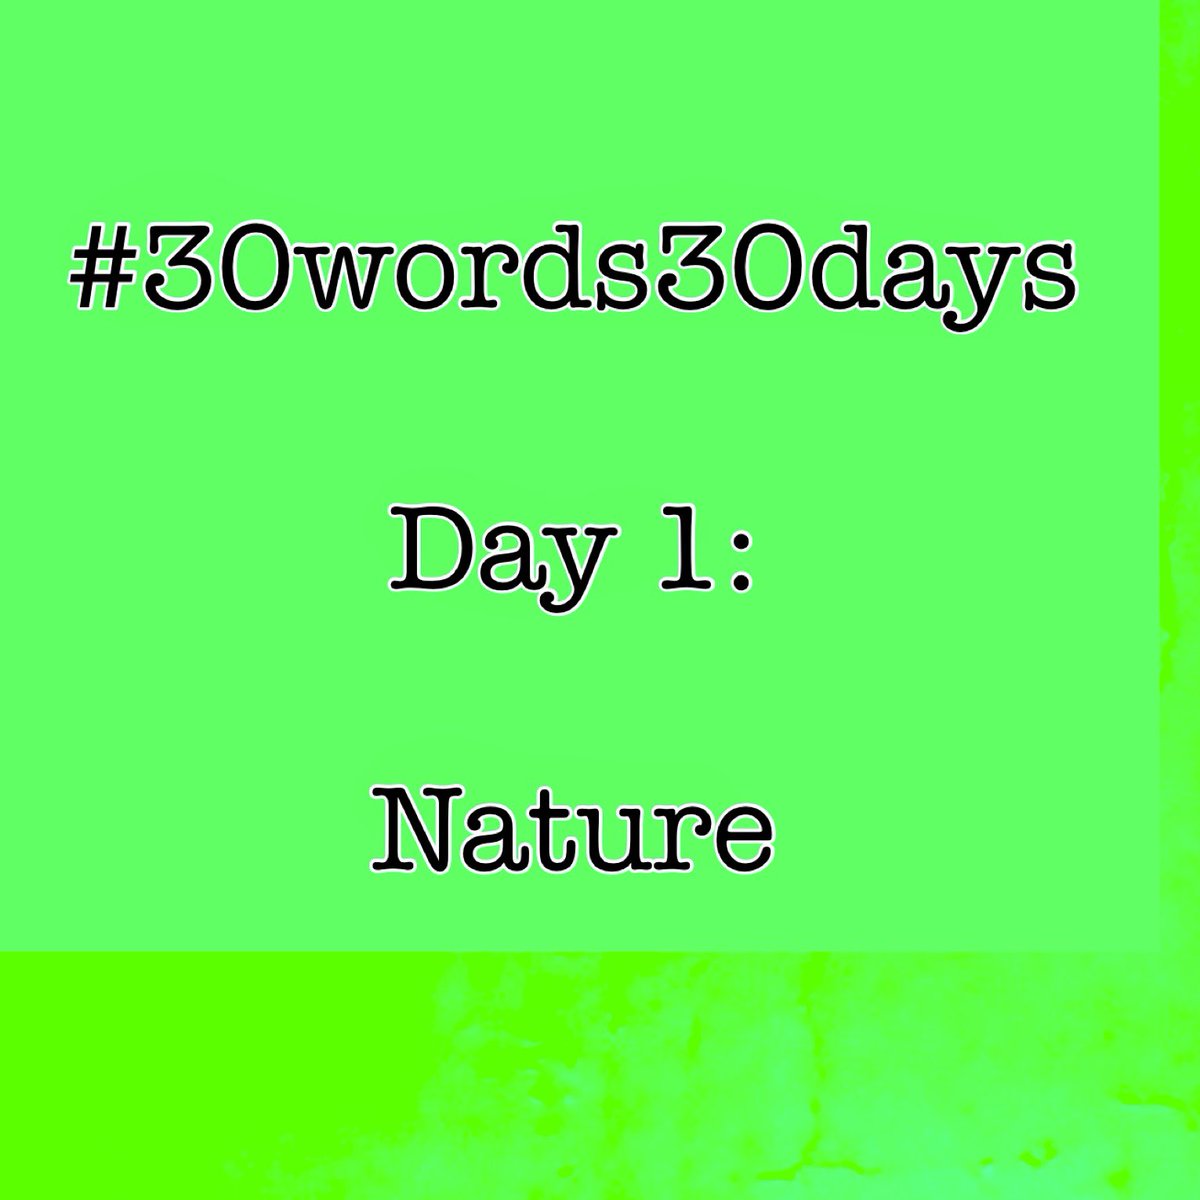 She ties herself up in smart-casual knots, packages each sentence carefully to avoid mispeaking. But over time there is no containing her colour and song, no concealing her true nature. #30words30days #nature #writingcommunity #amwriting #microfiction #flashfiction #writing